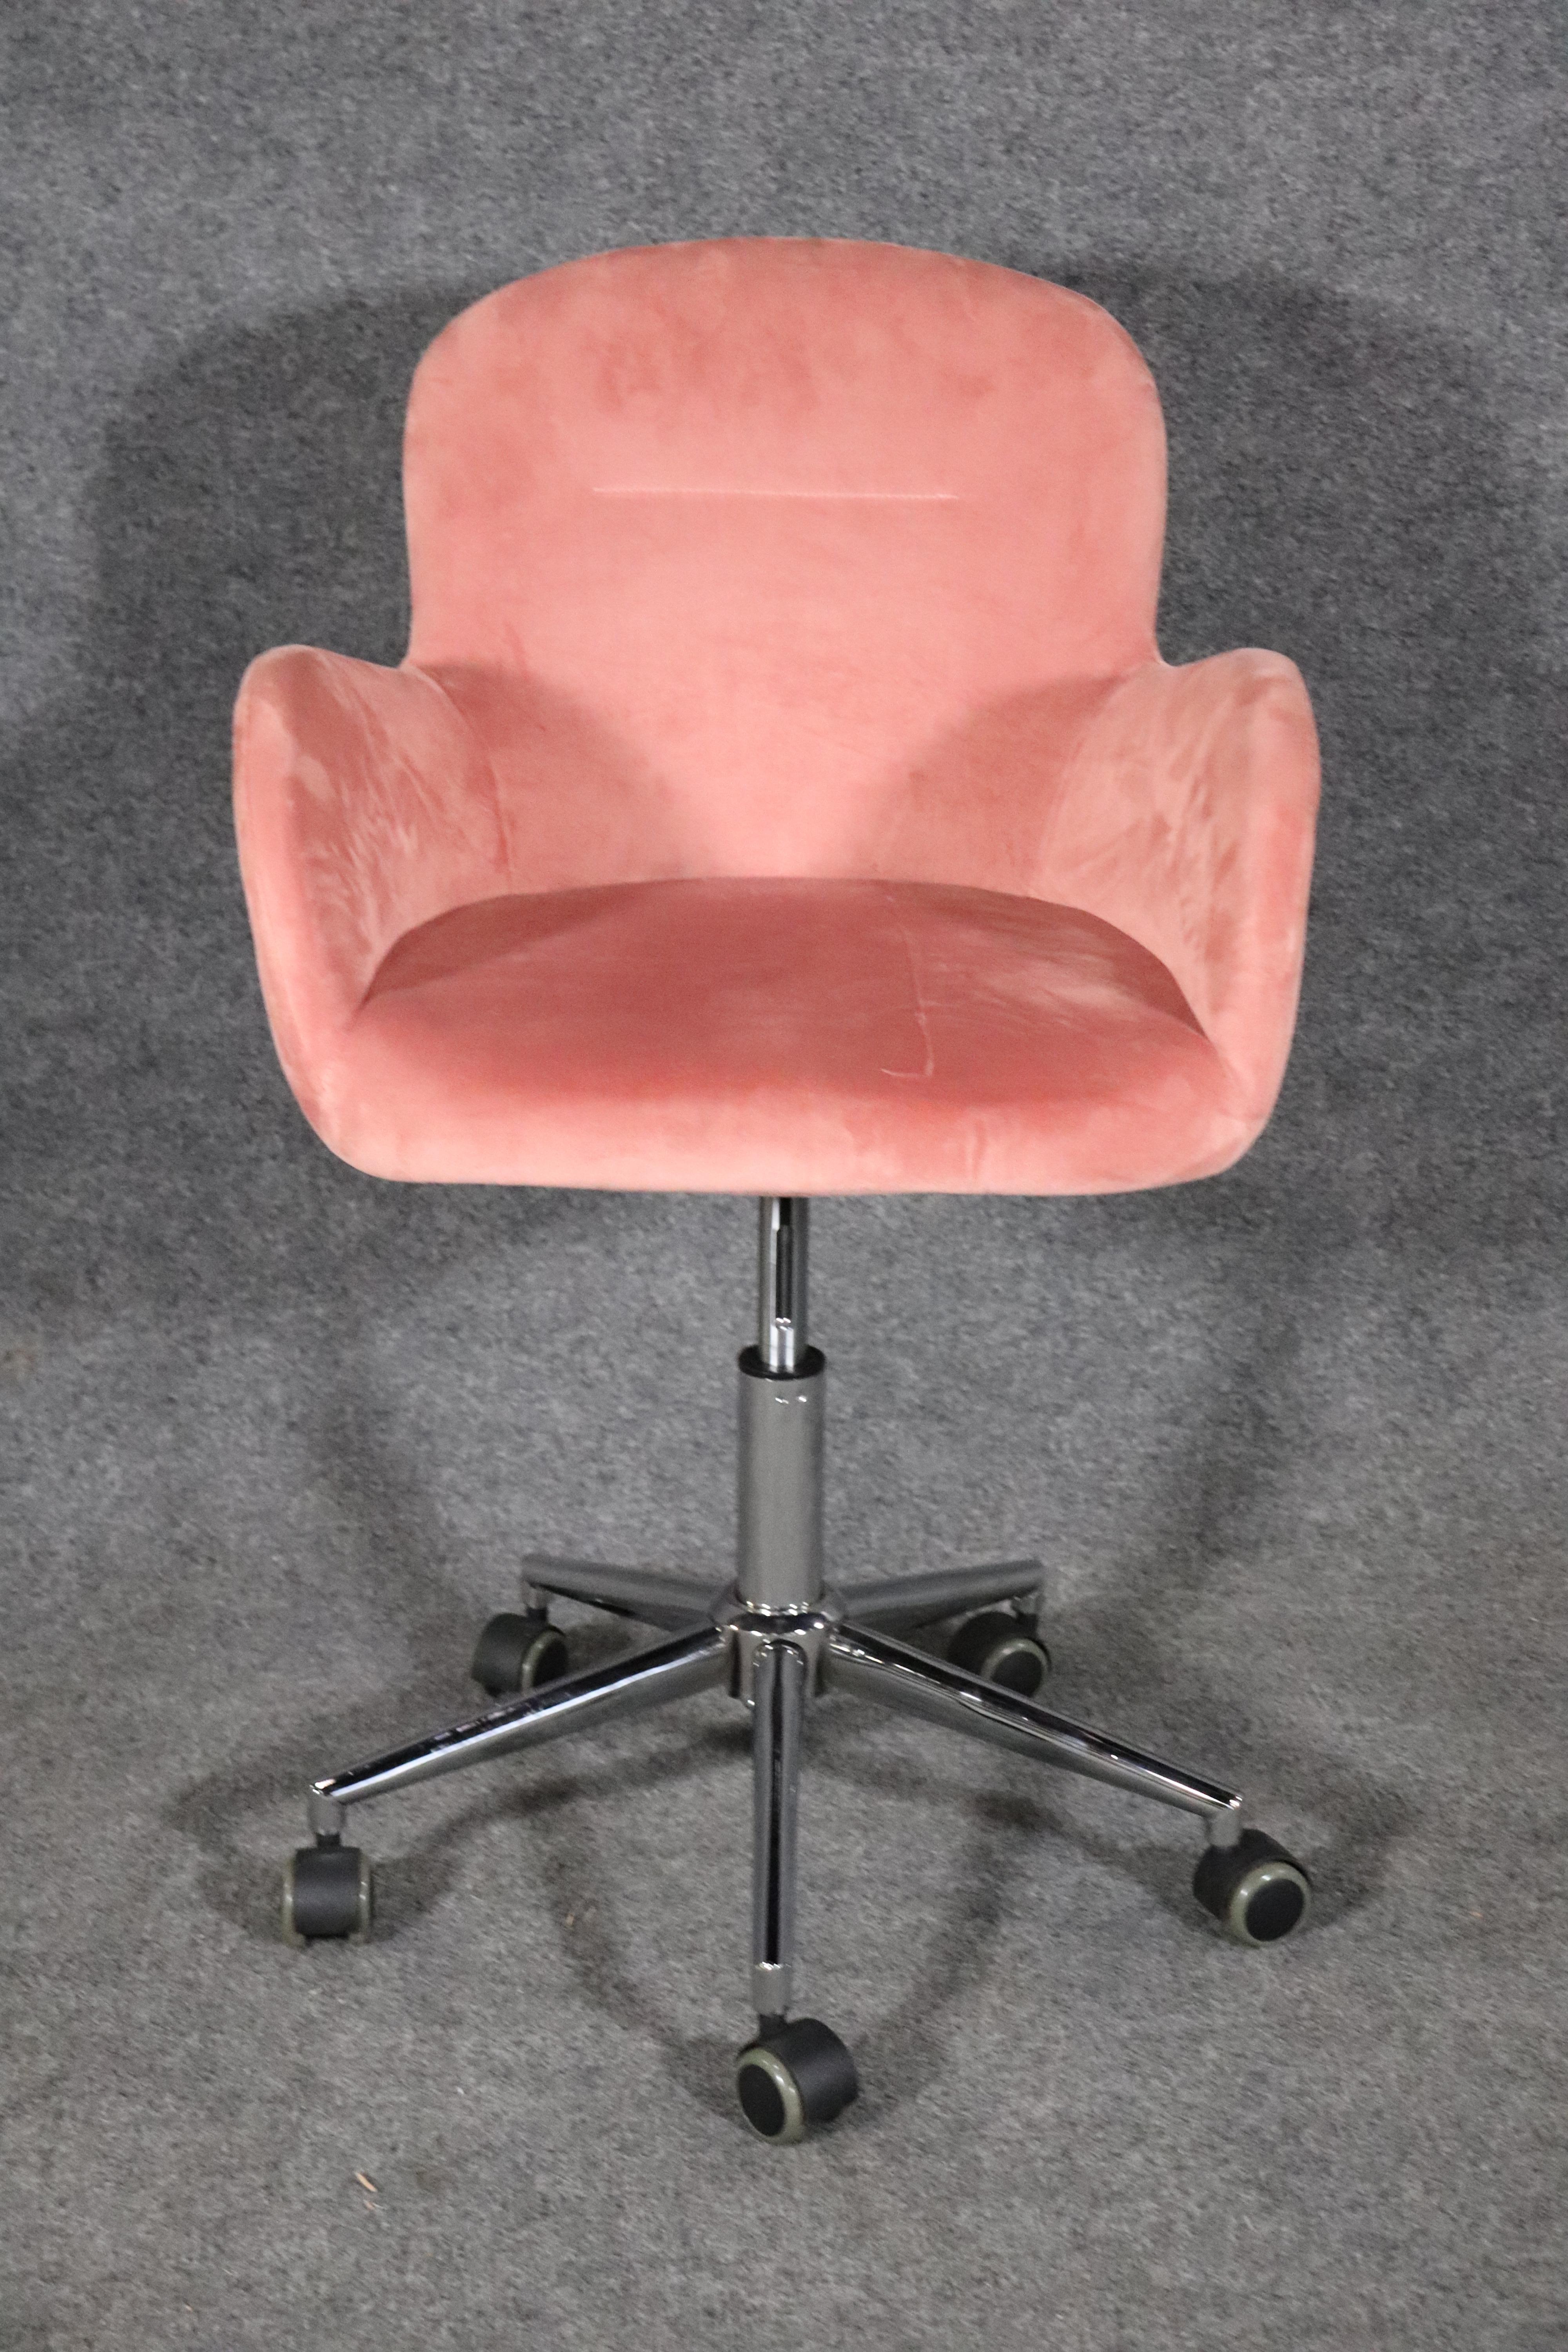 Mid-Century Modern style desk chair in pink fabric on a polished chrome frame.
Please confirm location NY or NJ.